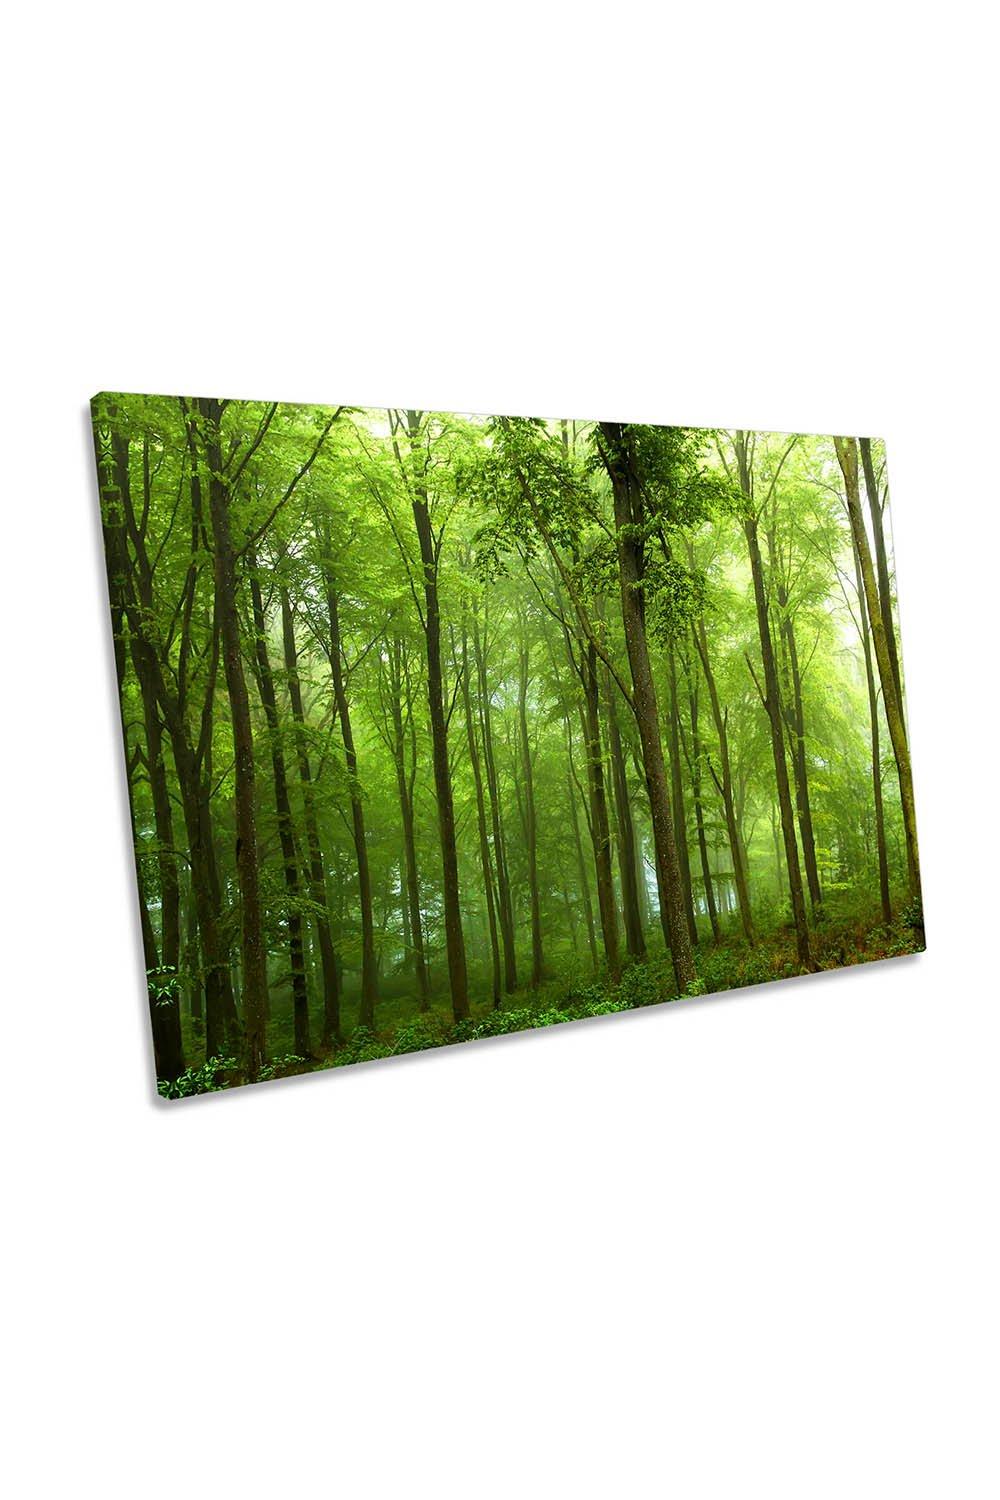 Green Forest Landscape Trees Canvas Wall Art Picture Print